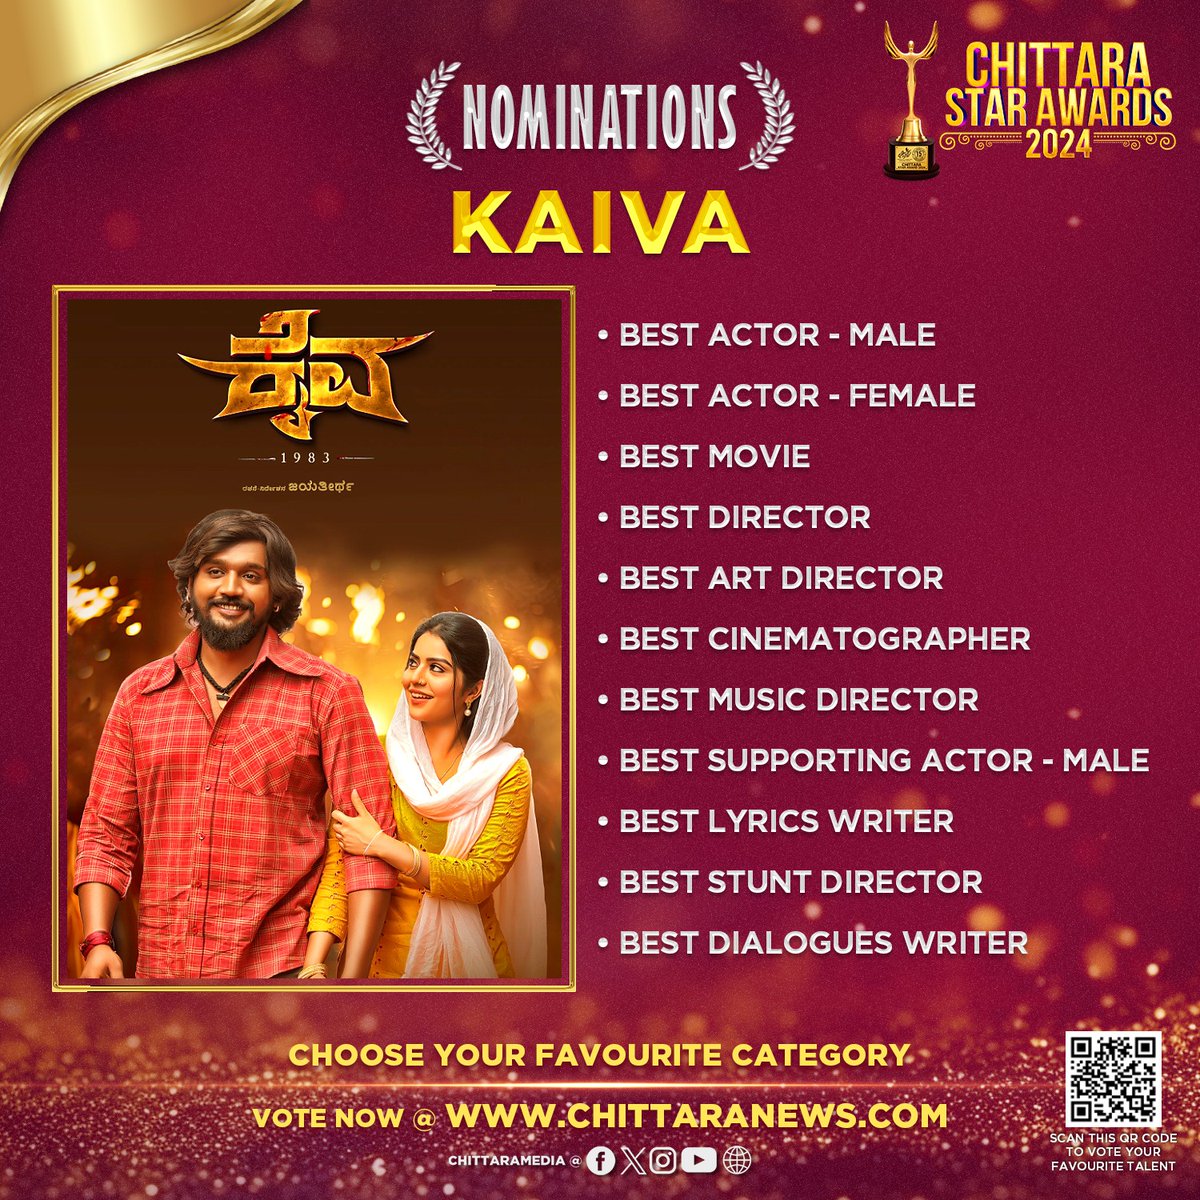 #Kaiva 11 Nominations at #ChittaraStarAwards2024 ! Global Voting is Now Live : awards.chittaranews.com/poll/780/ Vote now and show your love for Team #Kaiva #ChittaraStarAwards2024 #CSA2024 #ChittaraStarAwards